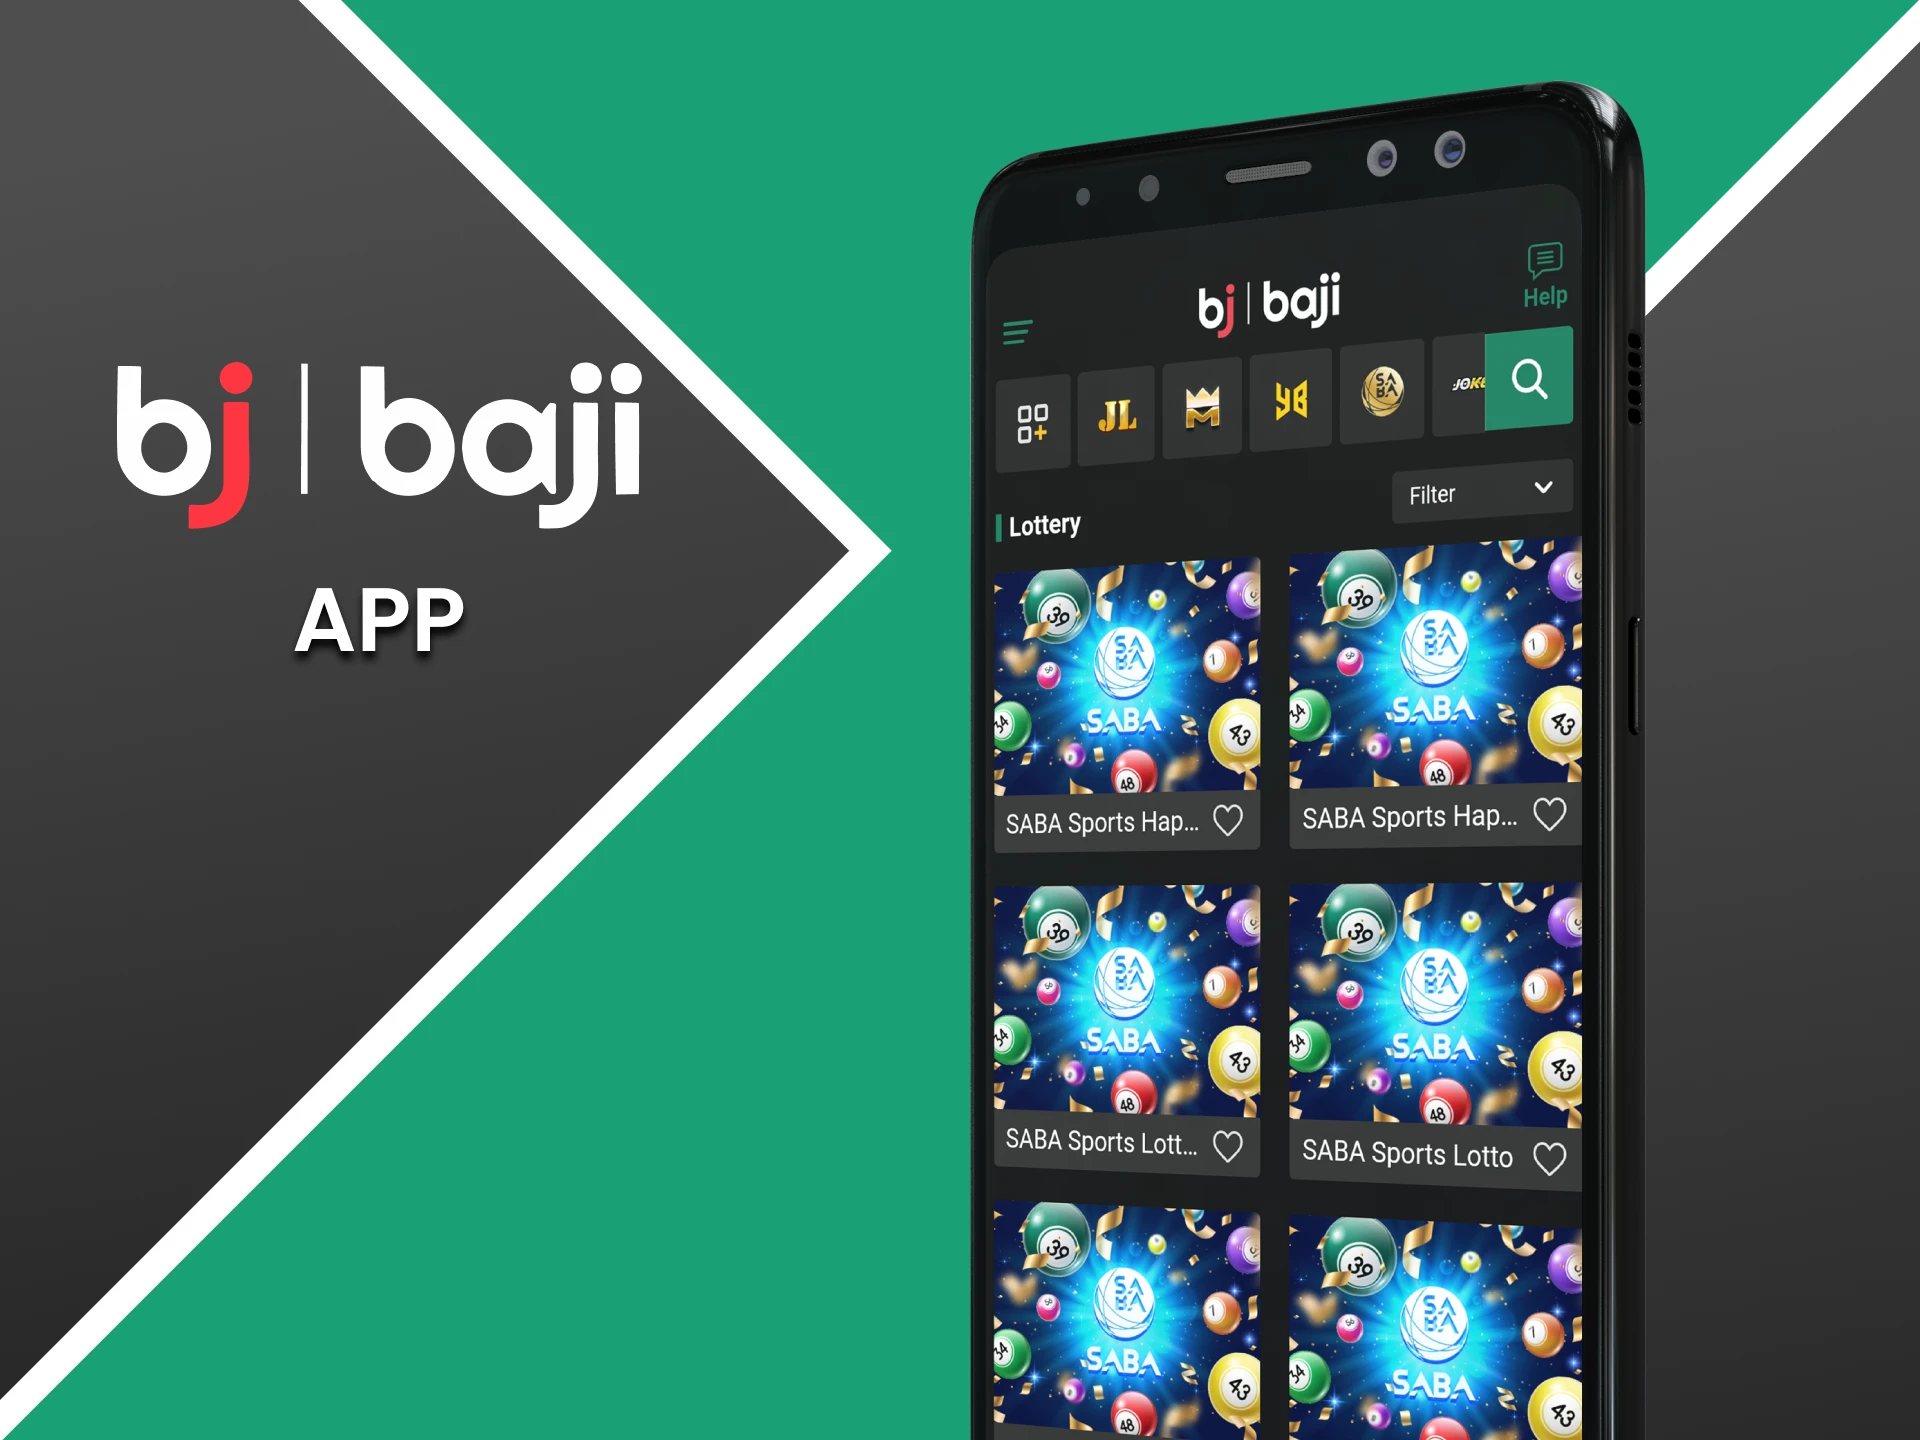 You can play the lottery using the Baji application.